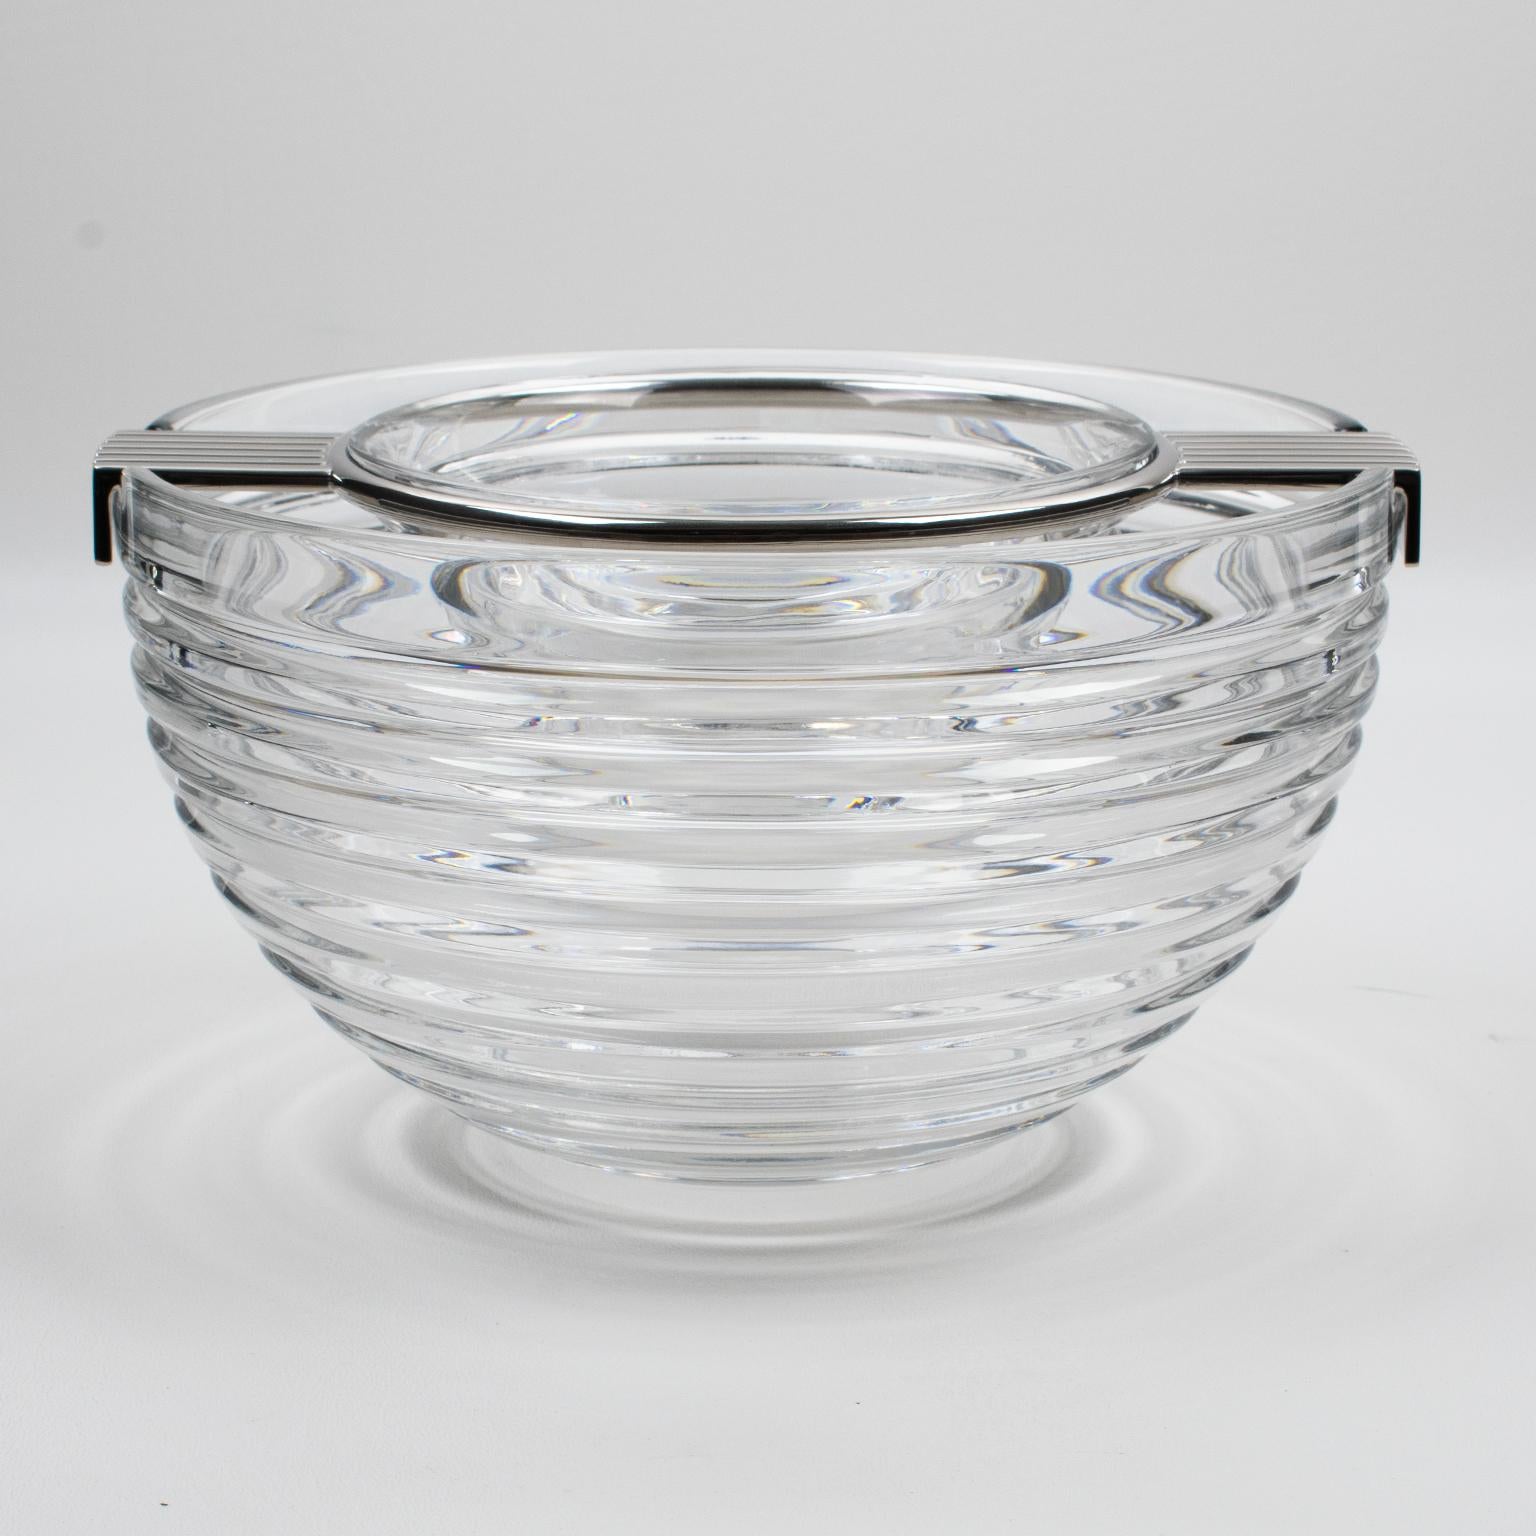 Stylish modernist Mid-Century silver plate and crystal caviar serving bowl or dish designed by Riedel, Italy for its Mesa collection in the 1960s. Minimalist chic design with geometric streamline shape, featuring a large stepped crystal container